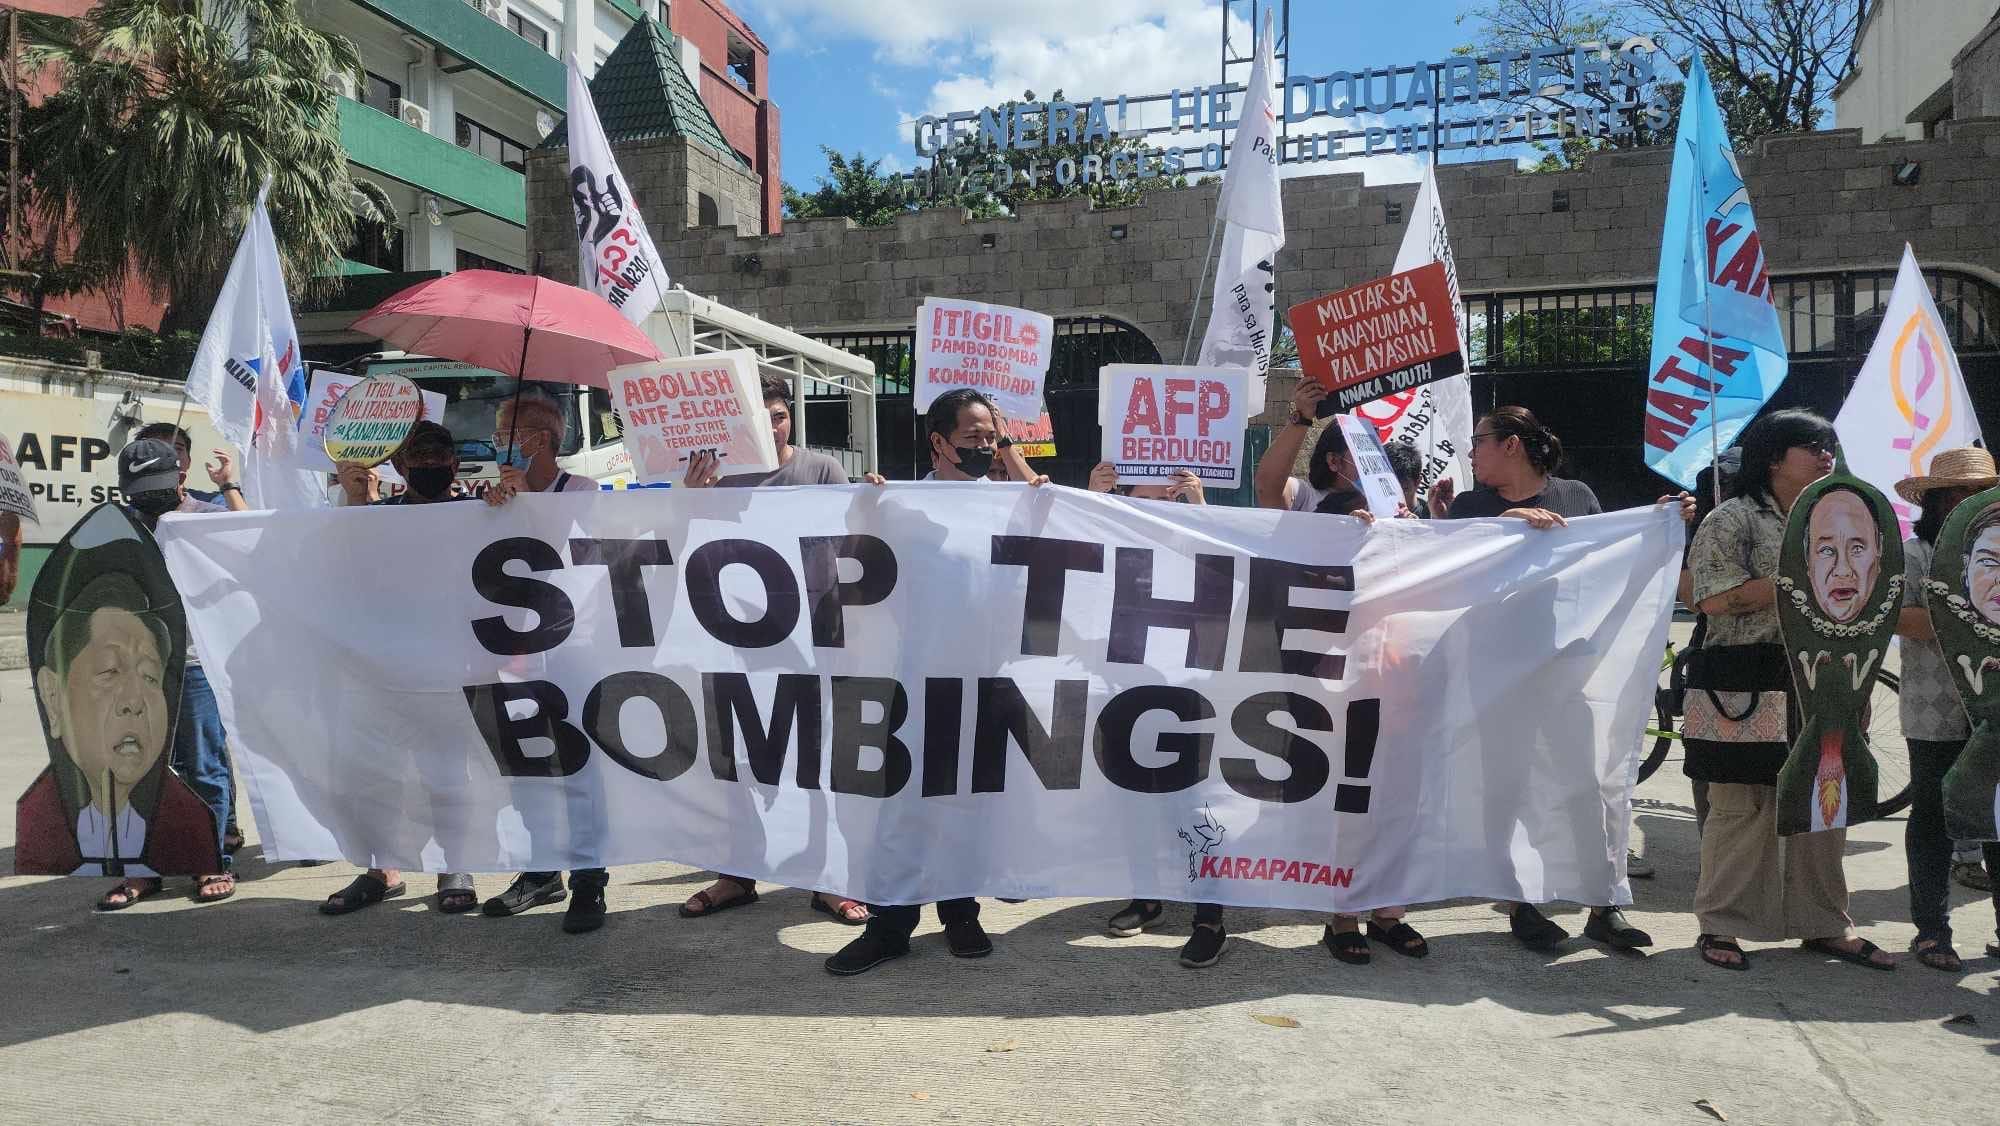 Protesters call out anew PNP, AFP”s alleged human rights violations